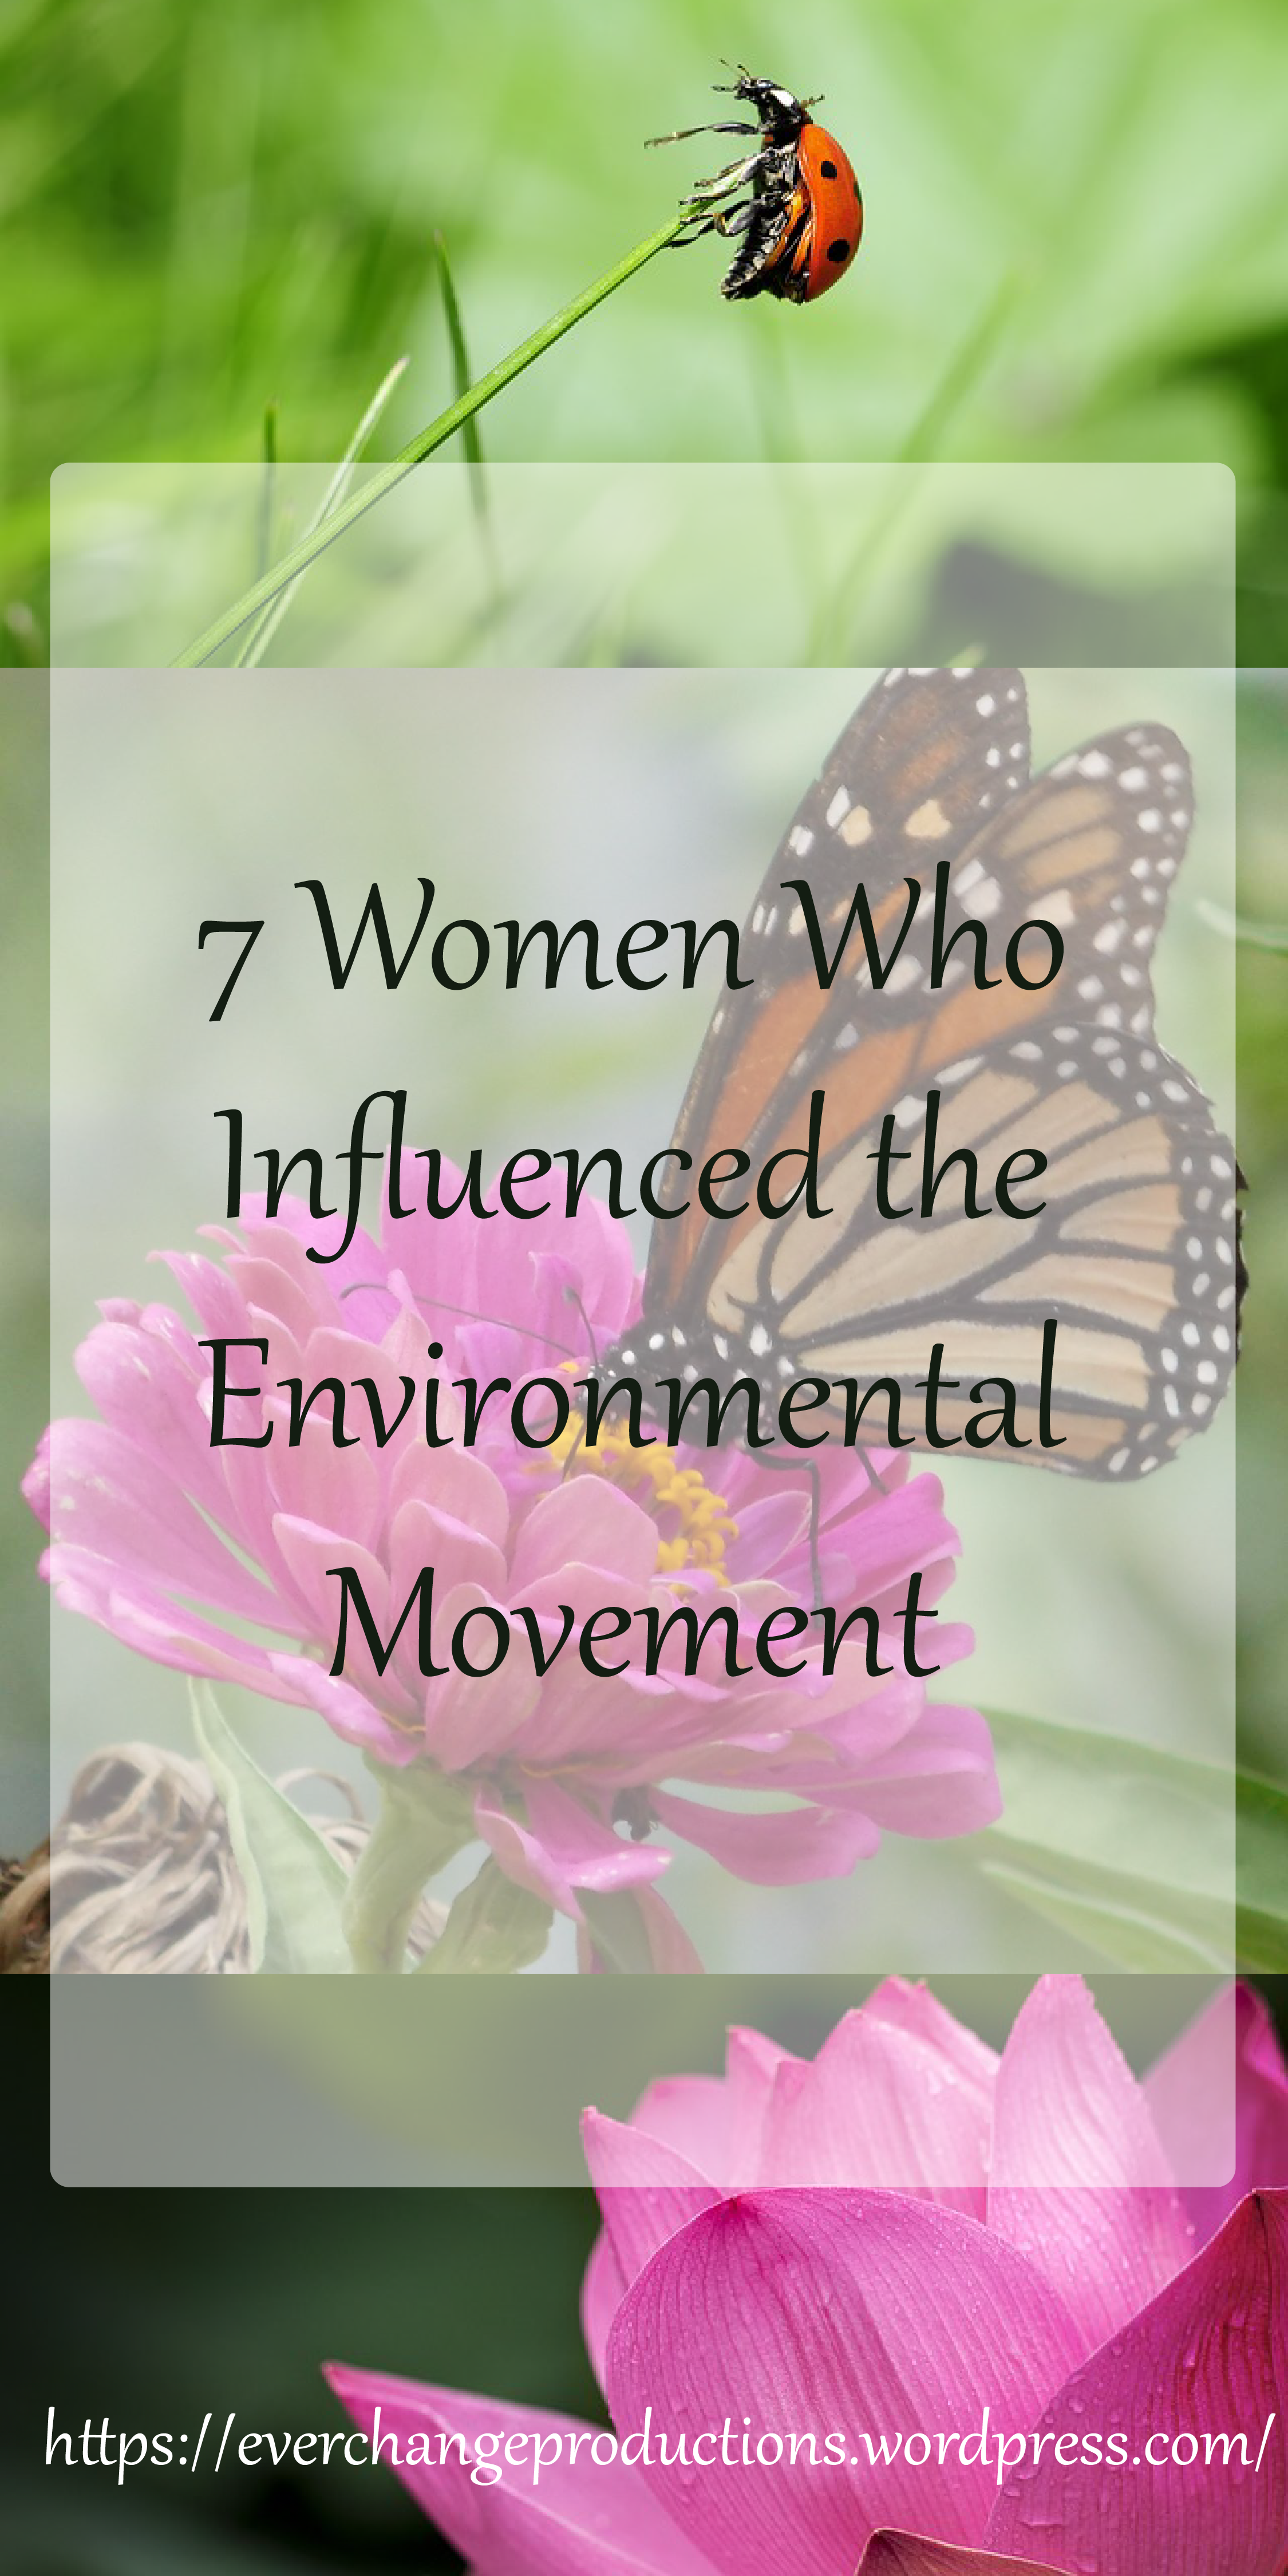 7 Women Who Influenced the Environmental Movement